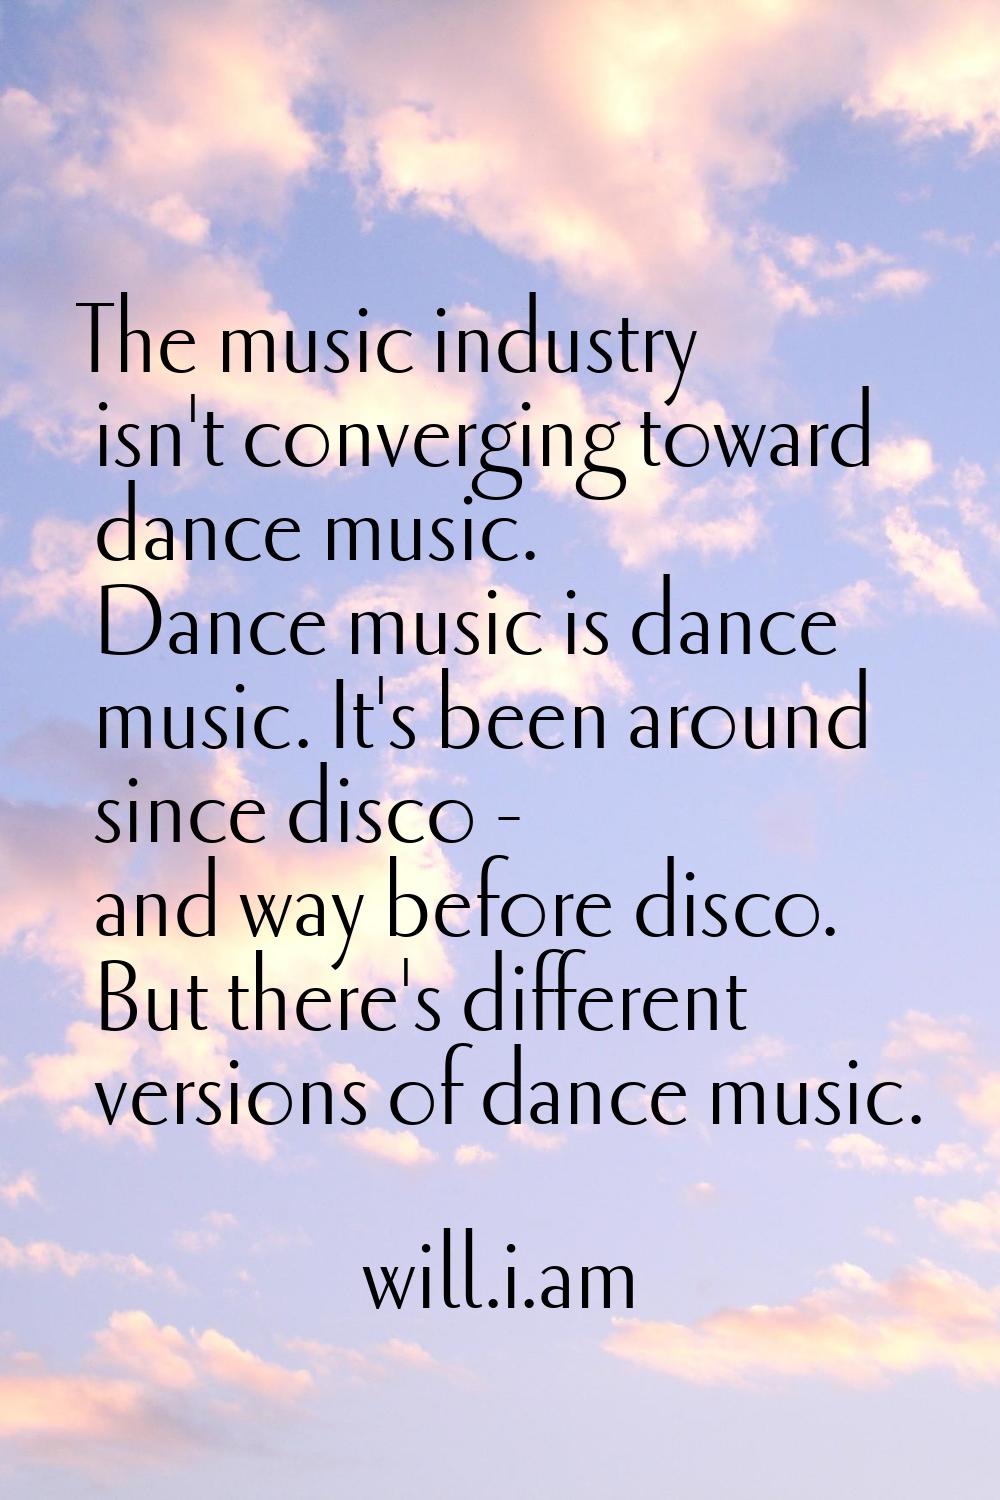 The music industry isn't converging toward dance music. Dance music is dance music. It's been aroun